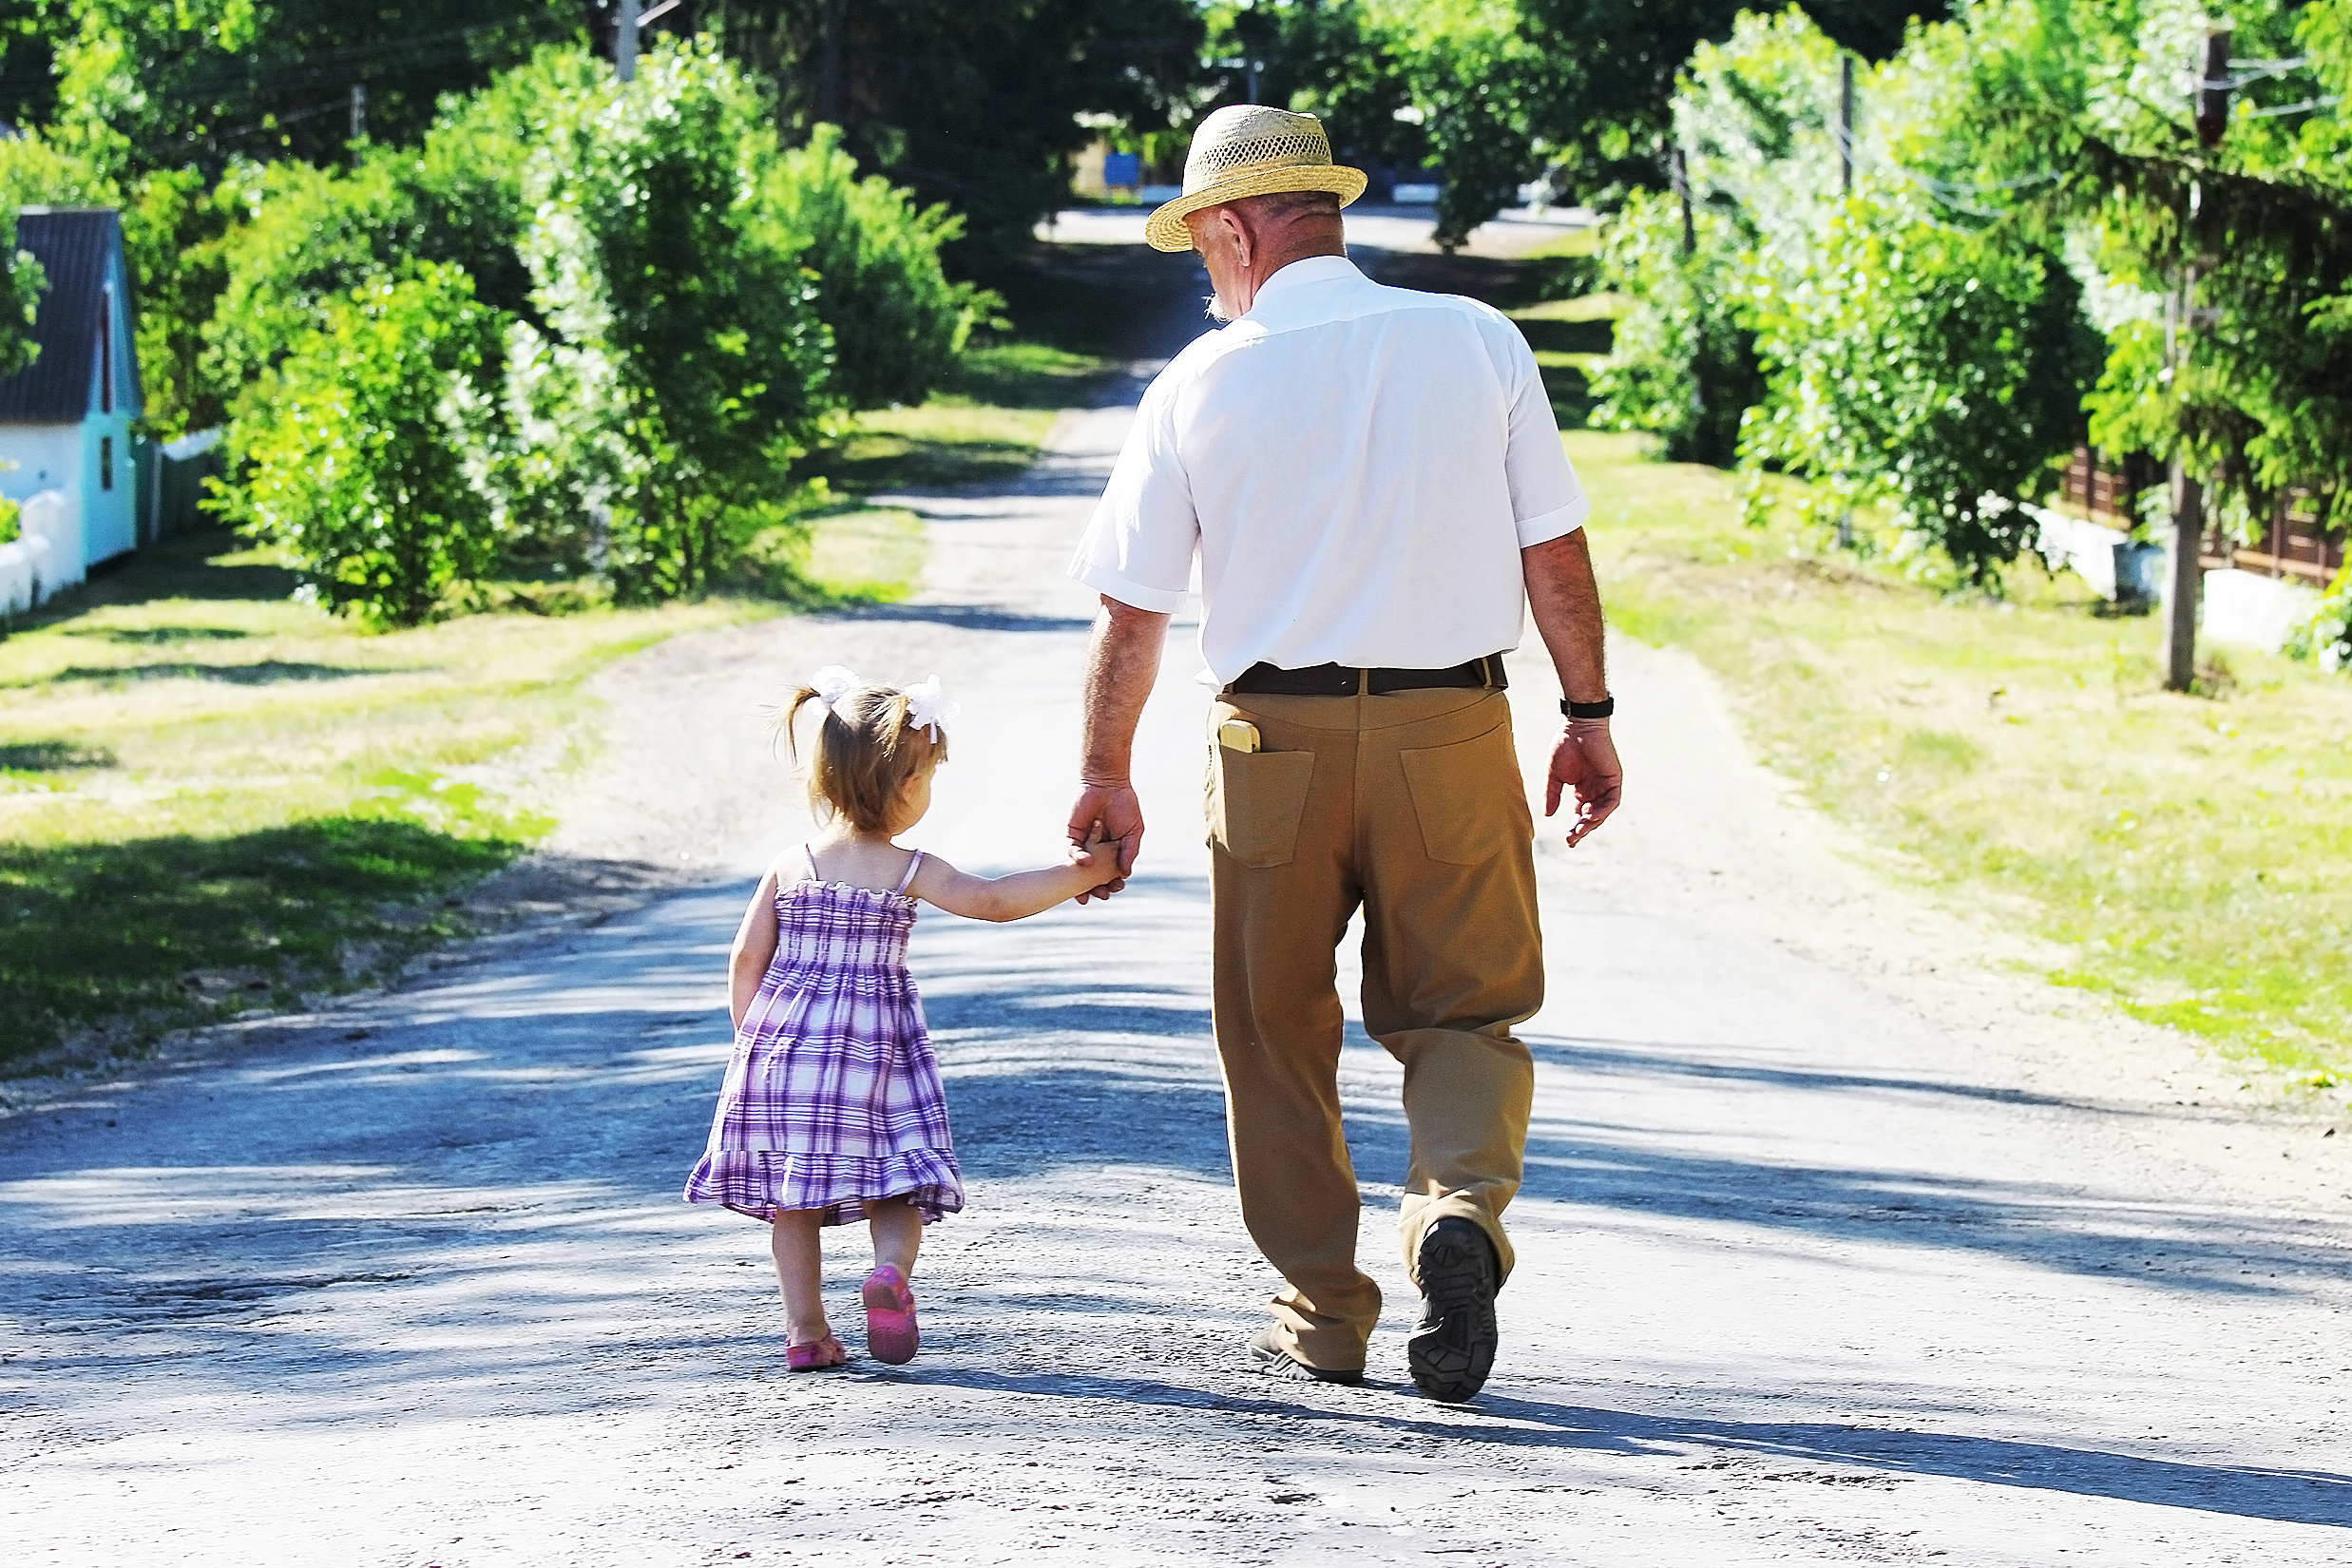 On a long gravel path boardered by green lush leaves is a grandfather dressed in tan slacks, white shirt, and tan fedora walking hand-in-hand with a toddler aged girl in pigtails and a multicolored sundress.